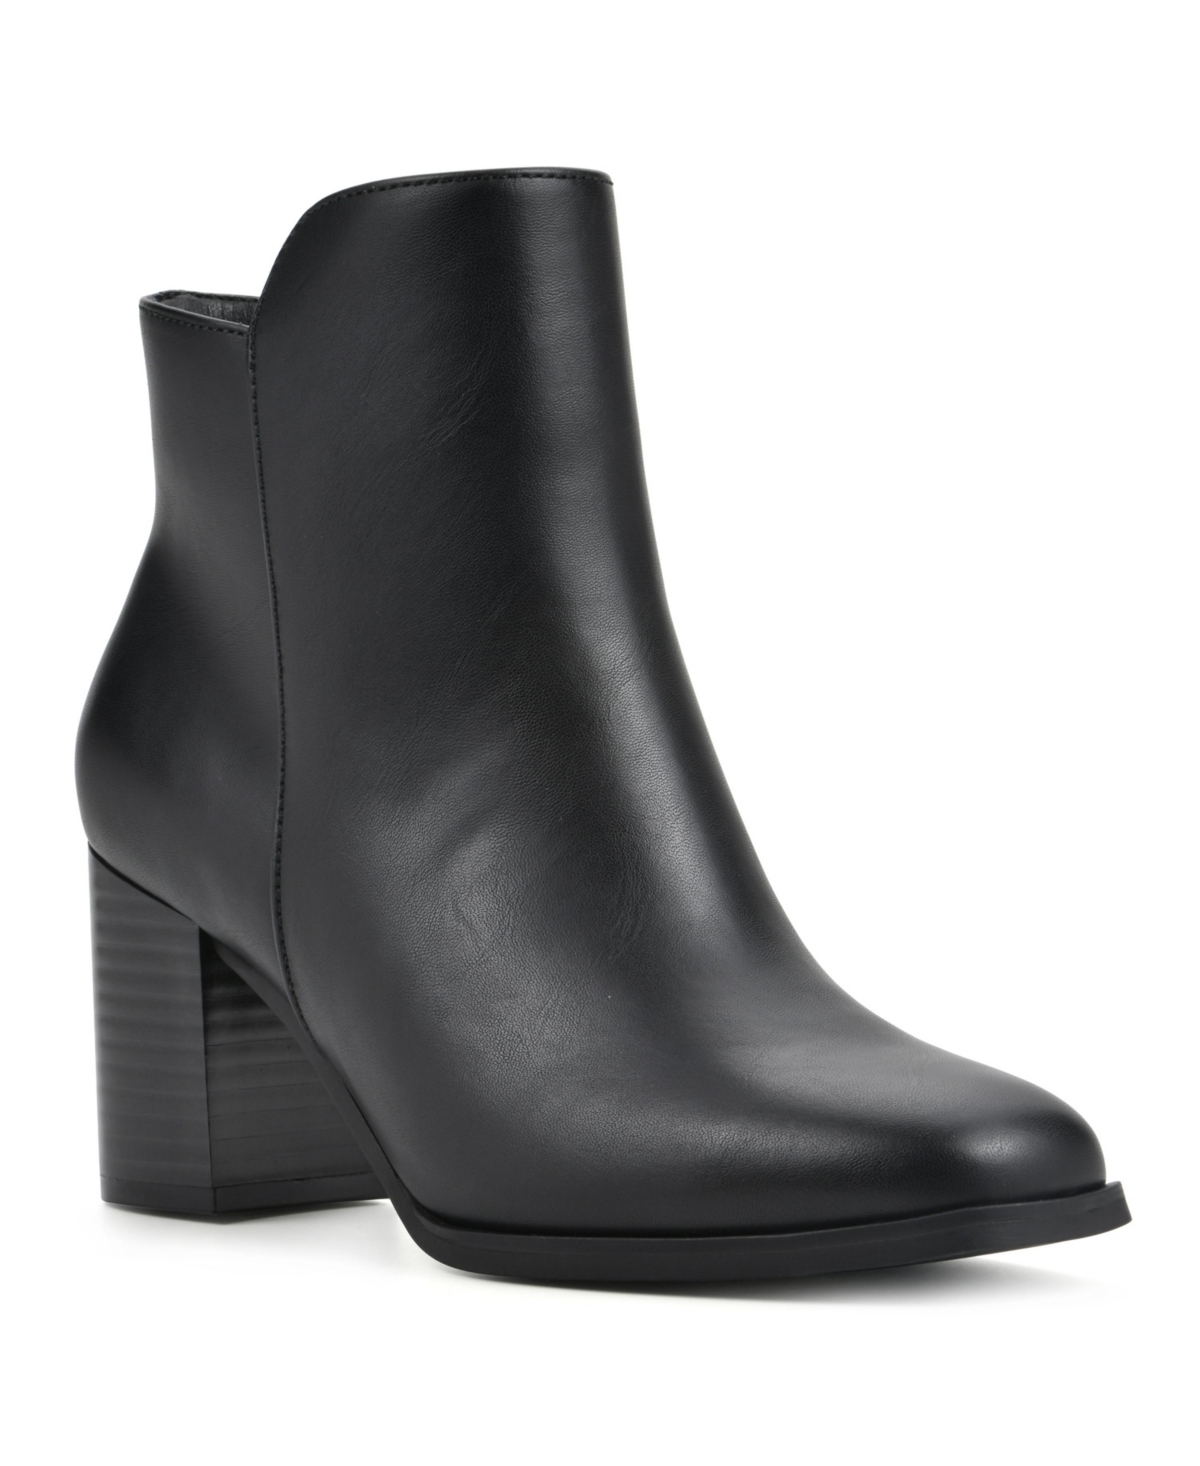 Women's Vogued Heeled Booties - Black Smooth